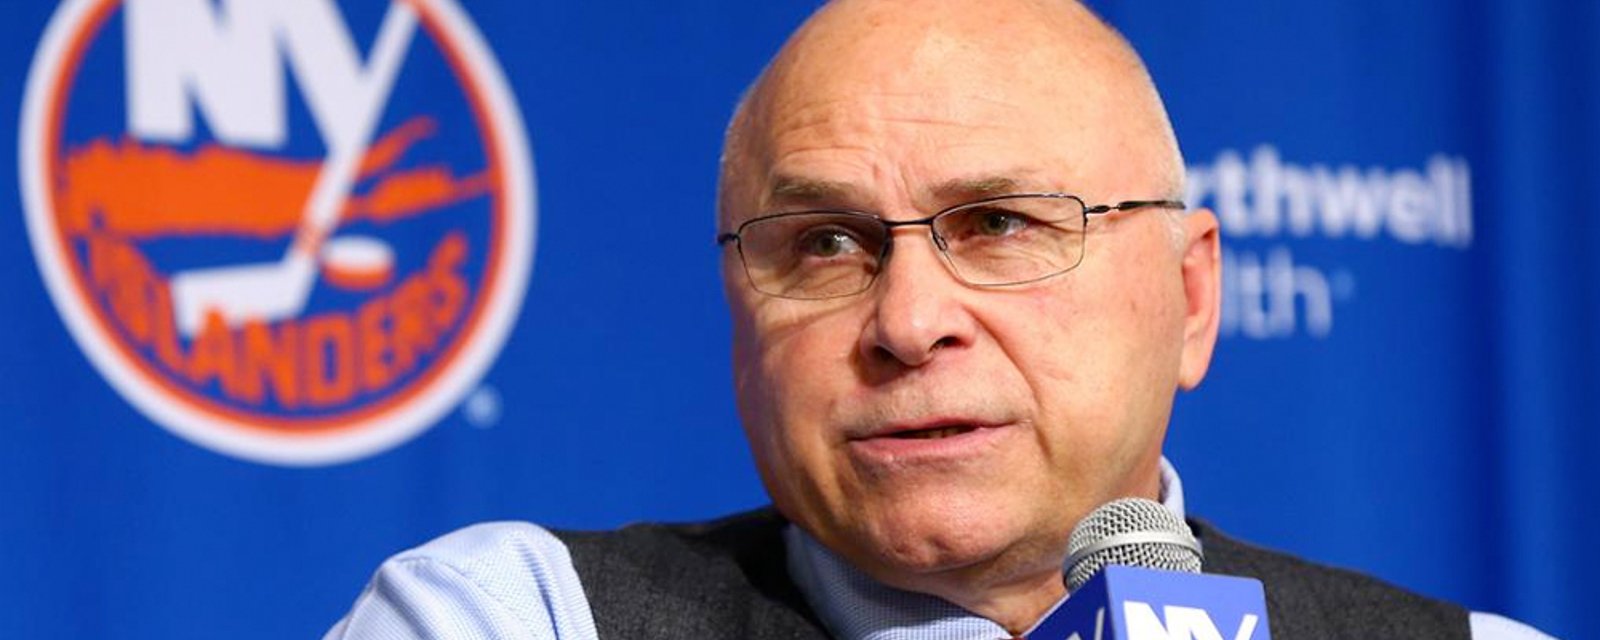 Barry Trotz gives ridiculous assessment of his team's situation after Game 2